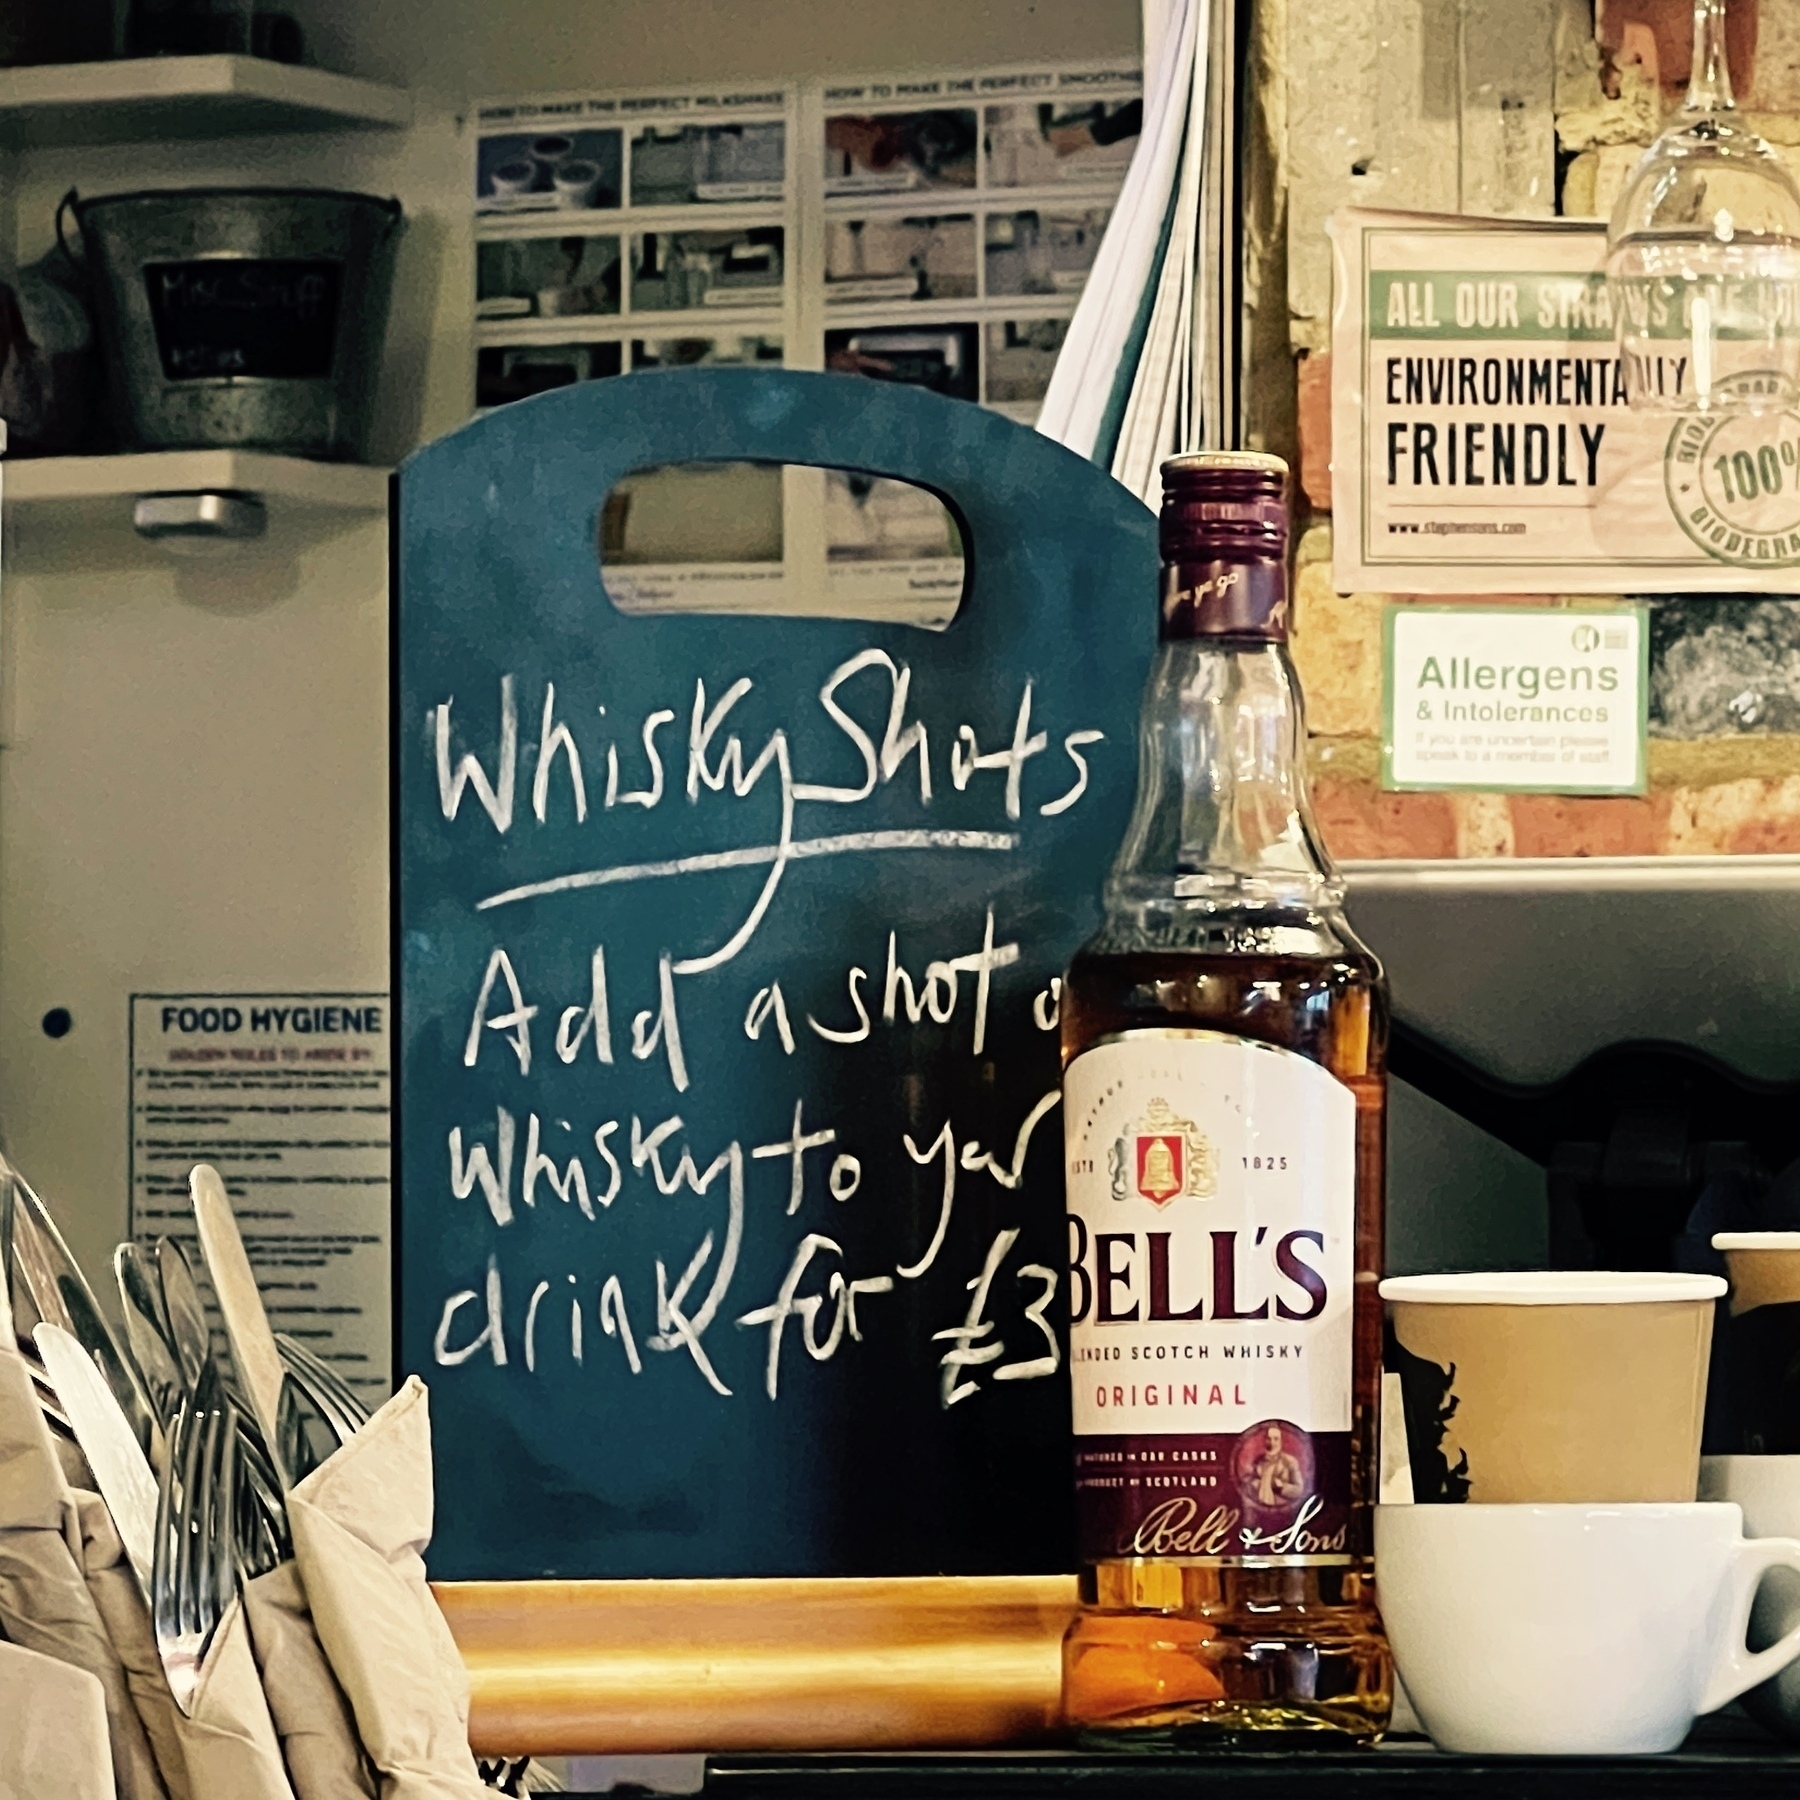 A sign iffering a shot of whisky in your drink for £3.